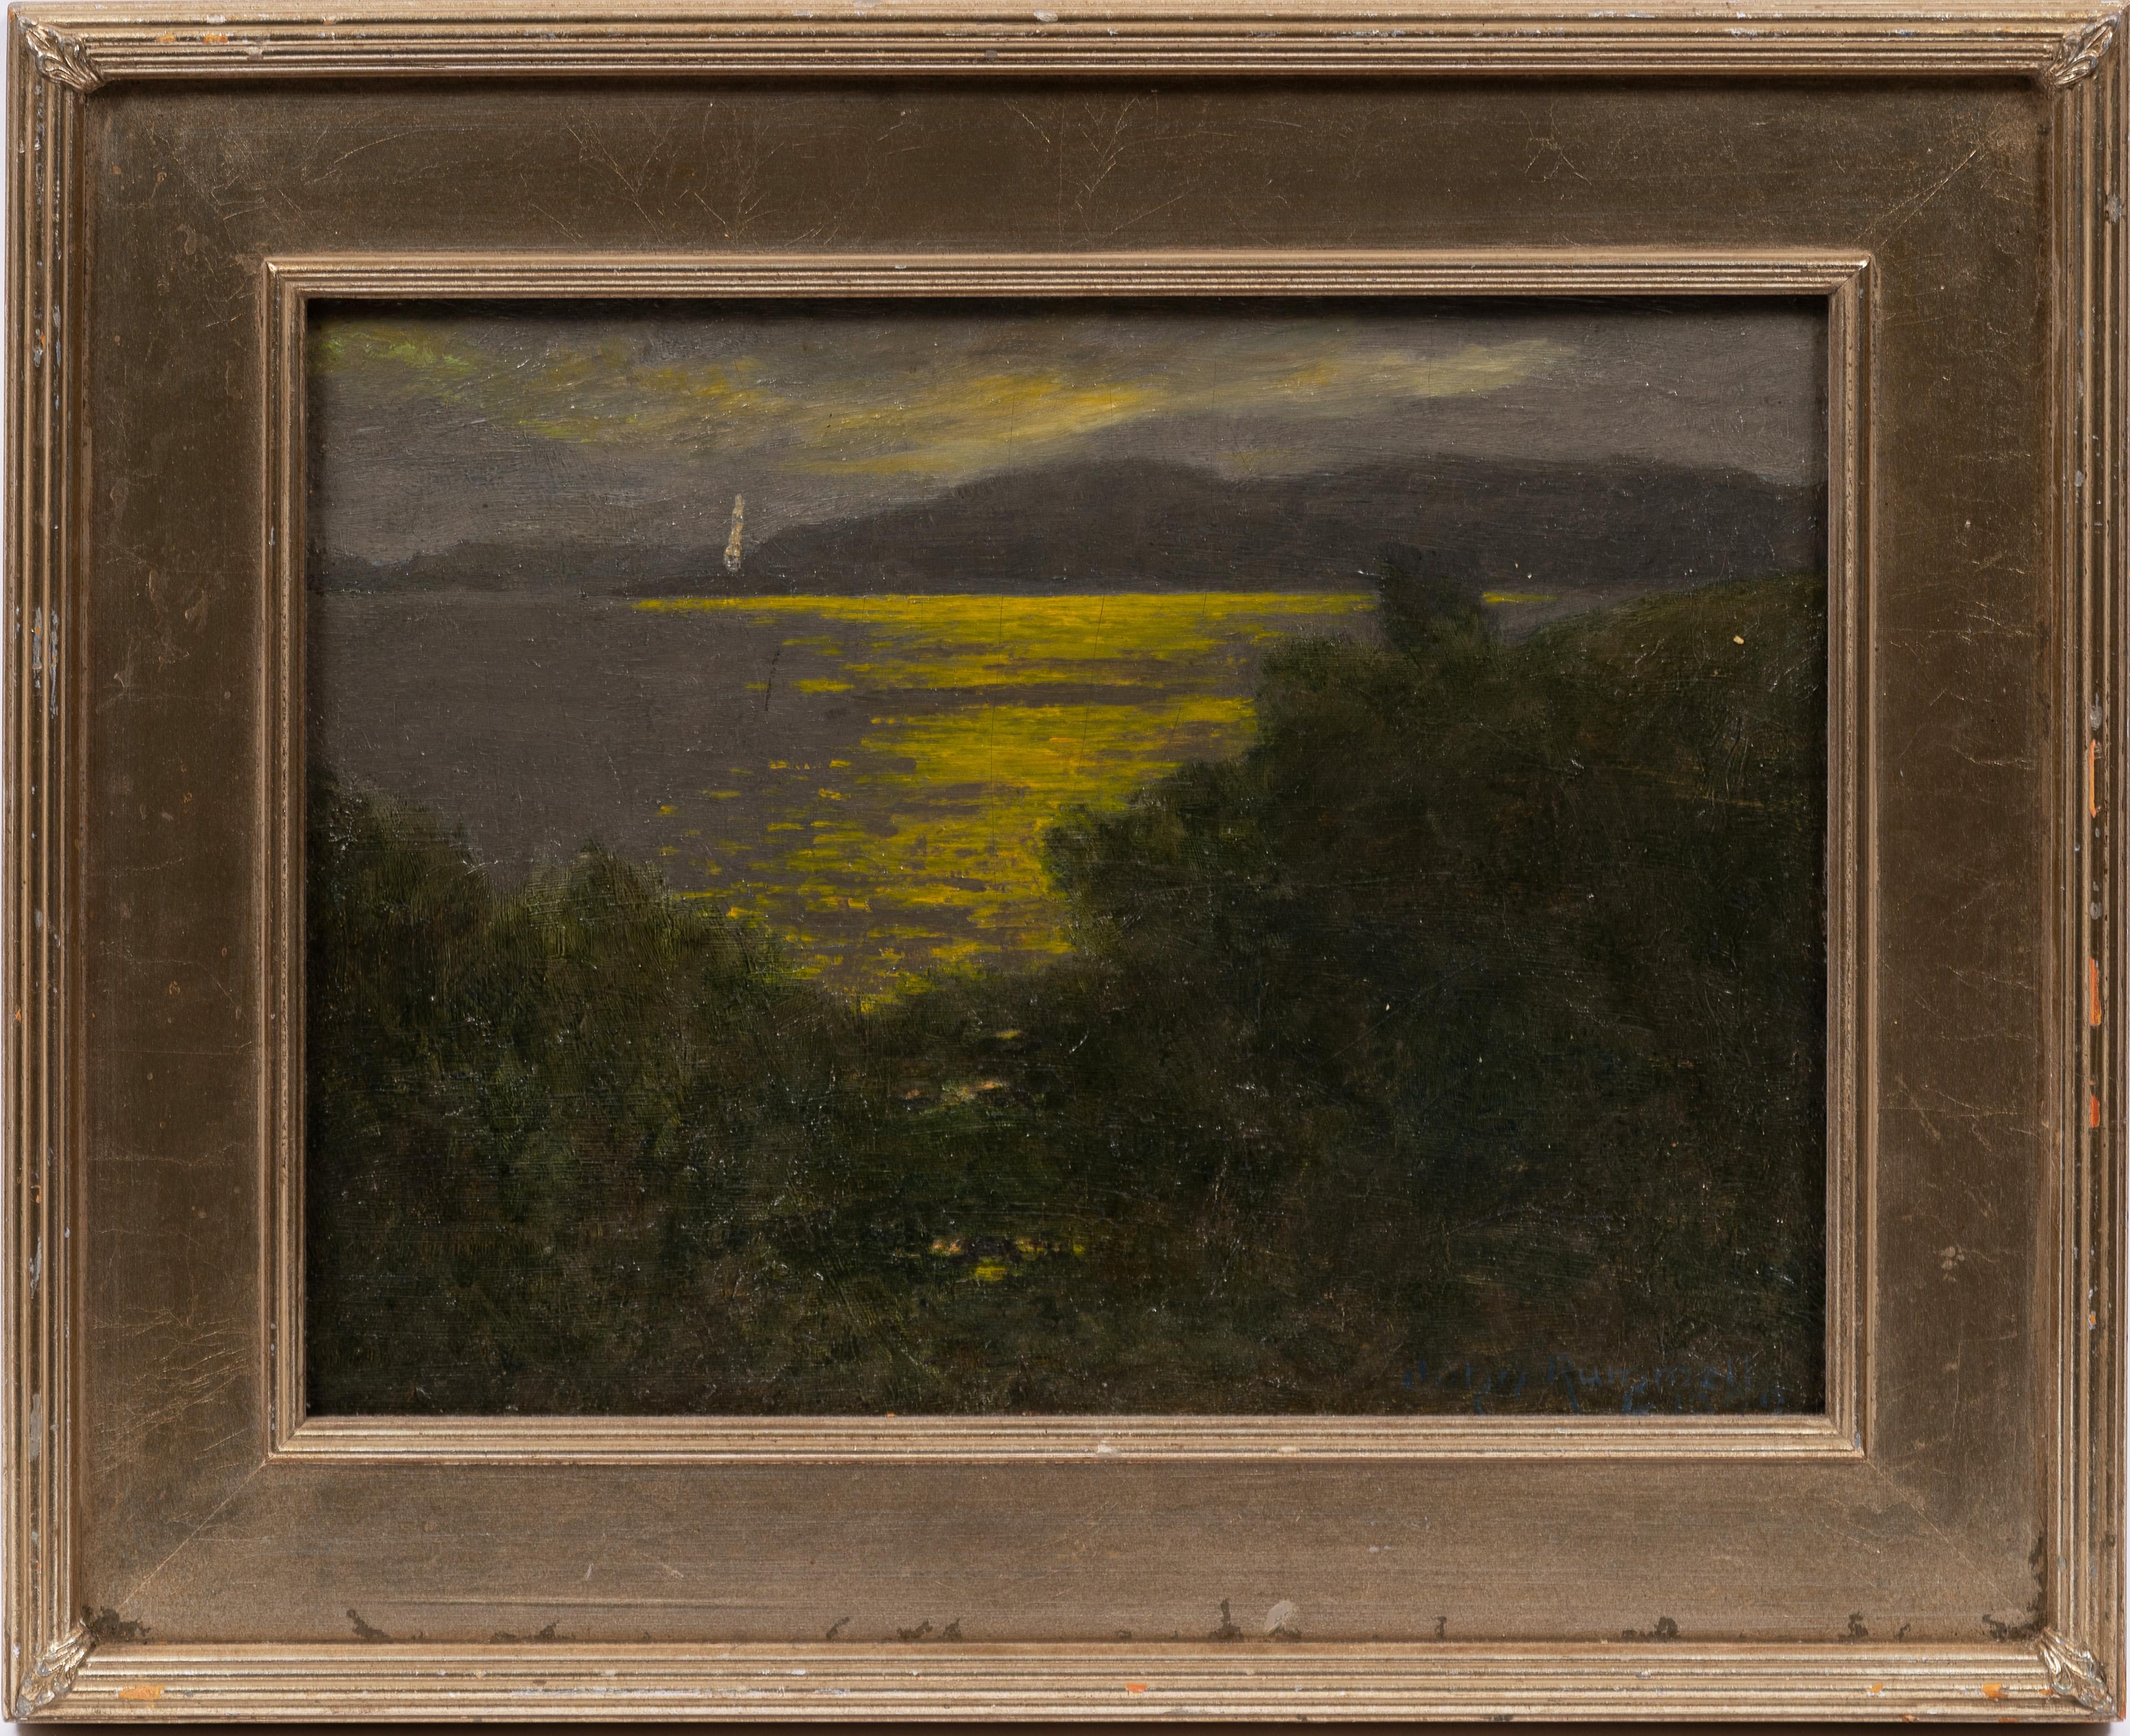 Antique American impressionist nocturnal seascape by John Rummell (1861 - 1942).  Framed.  Signed. 


Artist Bio:

John Rummell (American, 1861-1942) was a noted landscape and portrait painter, printmaker, lecturer, teacher and writer from Buffalo,